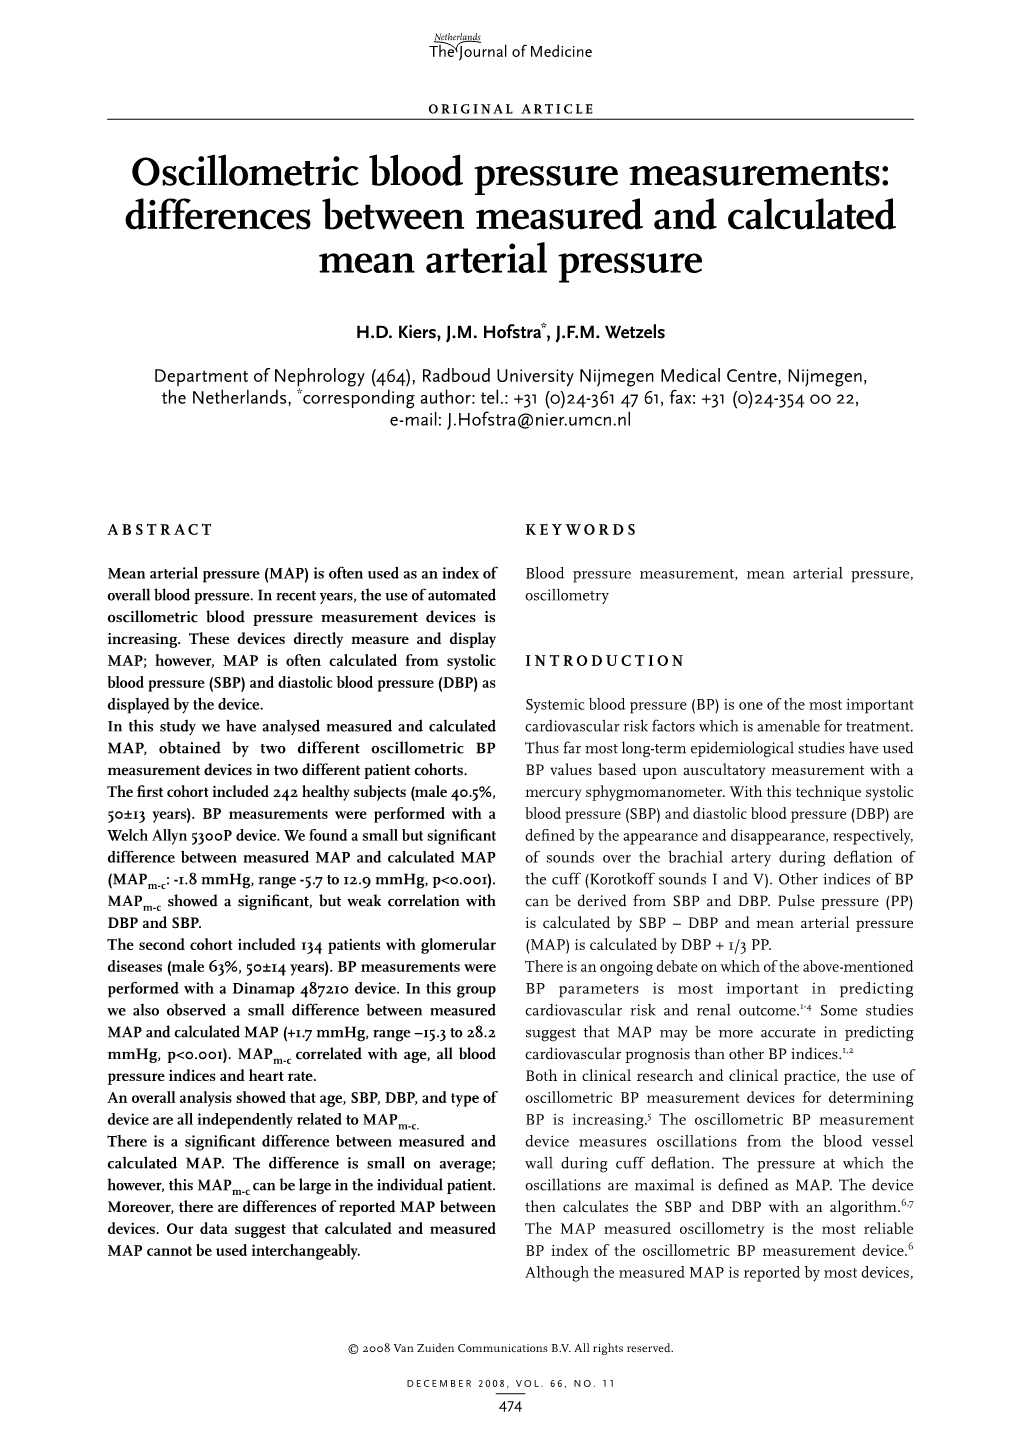 Differences Between Measured and Calculated Mean Arterial Pressure